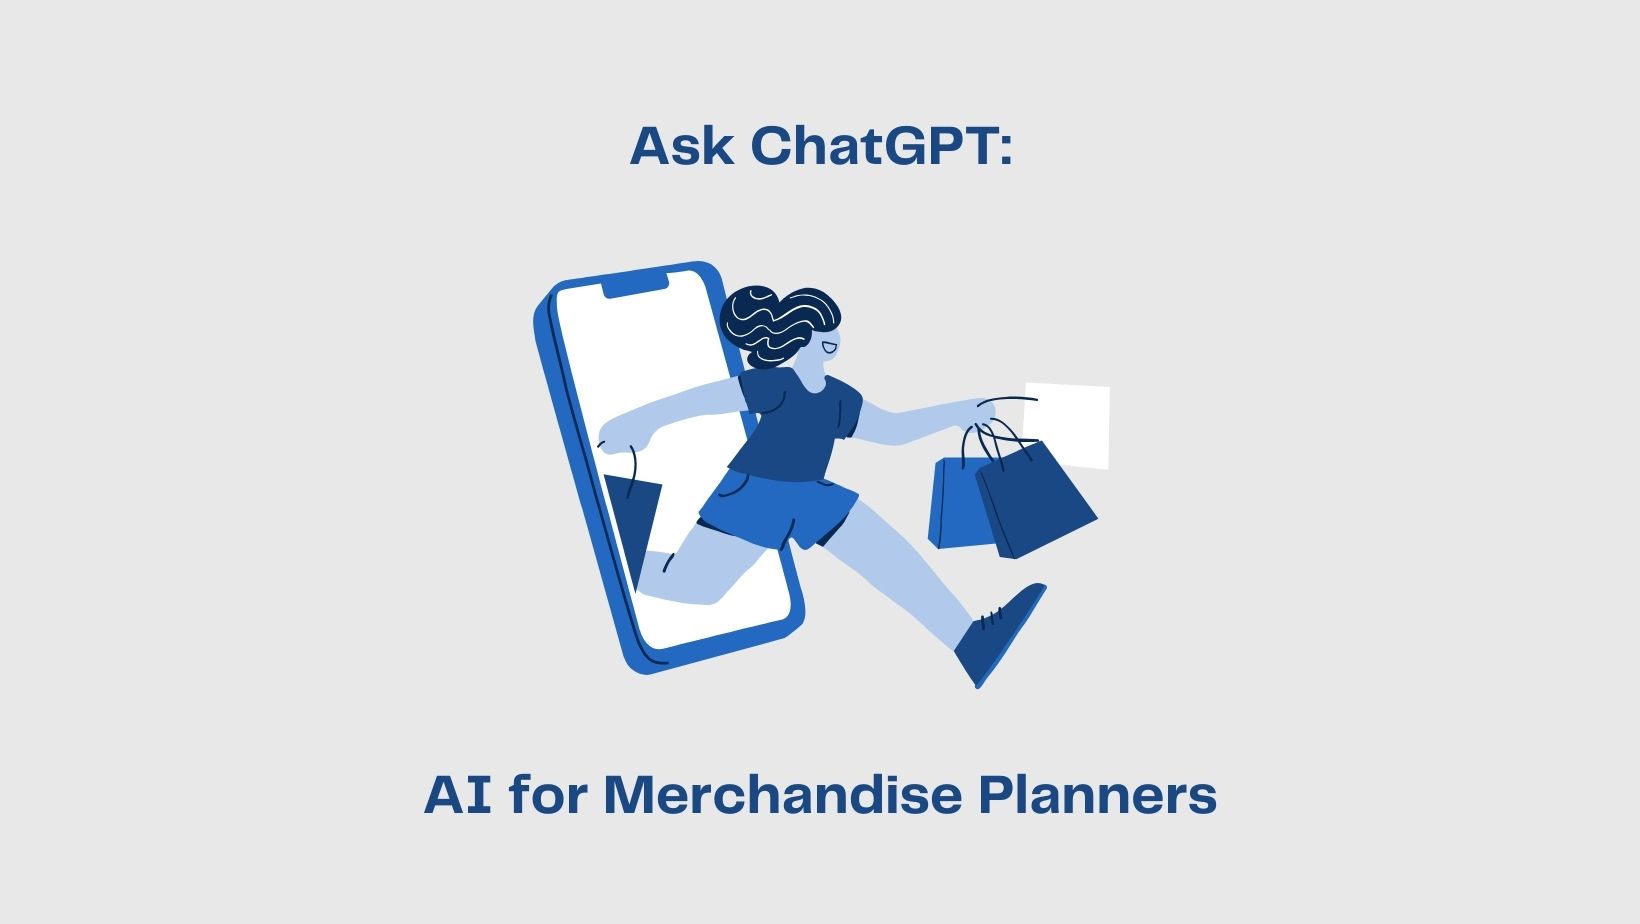 ChatGPT has a lot to say about merchandise planning.